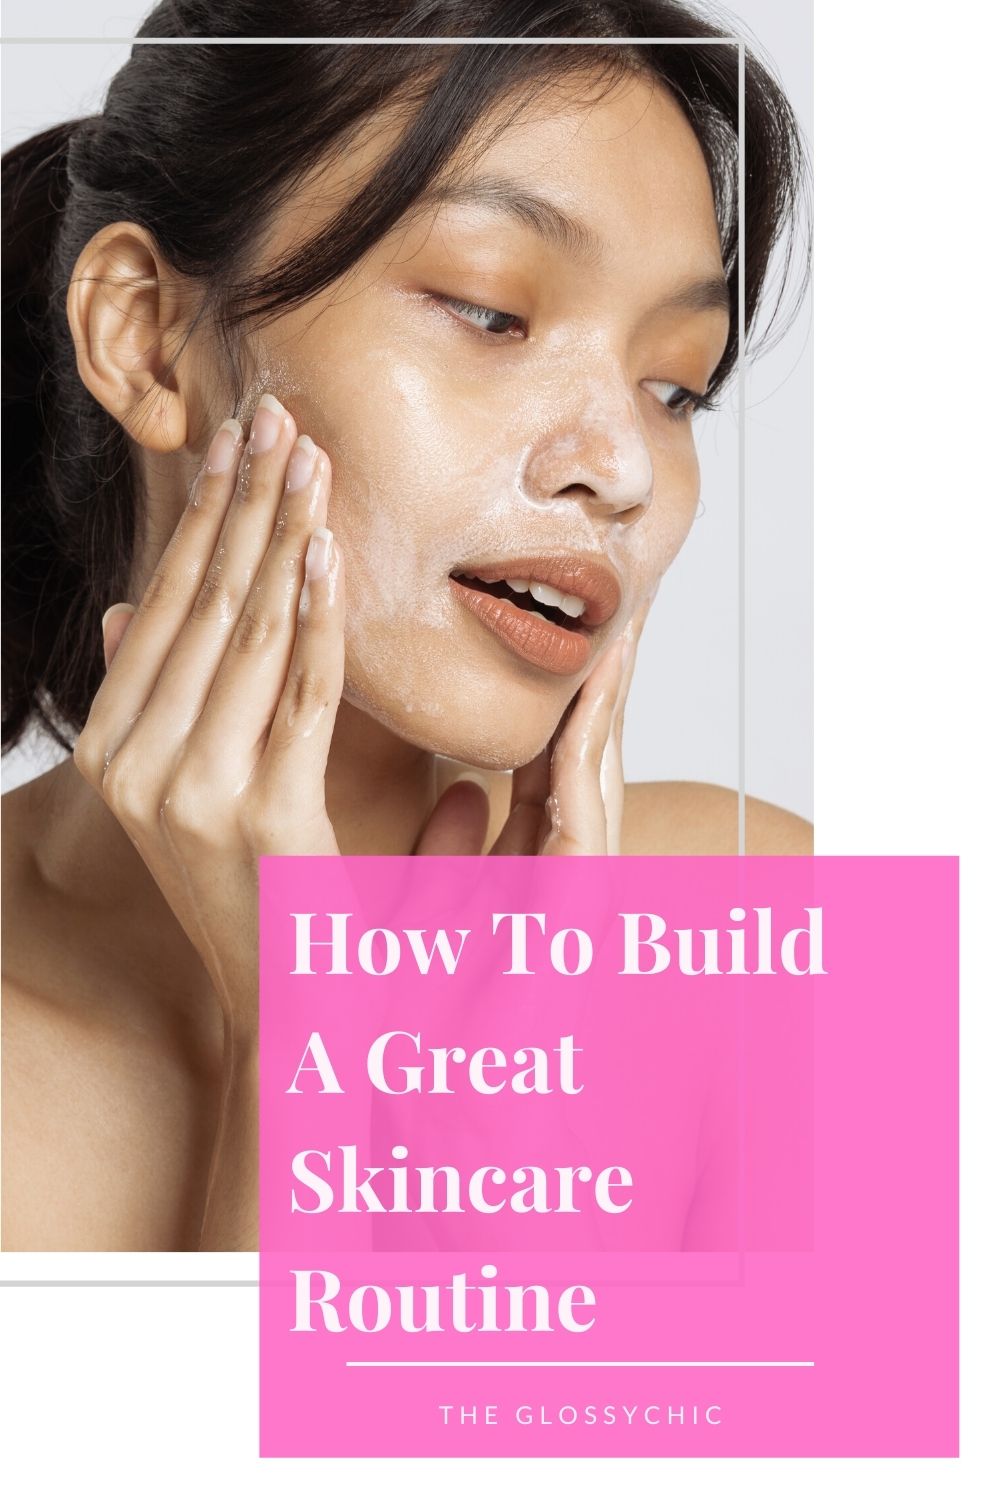 How To Build A Great Skincare Routine